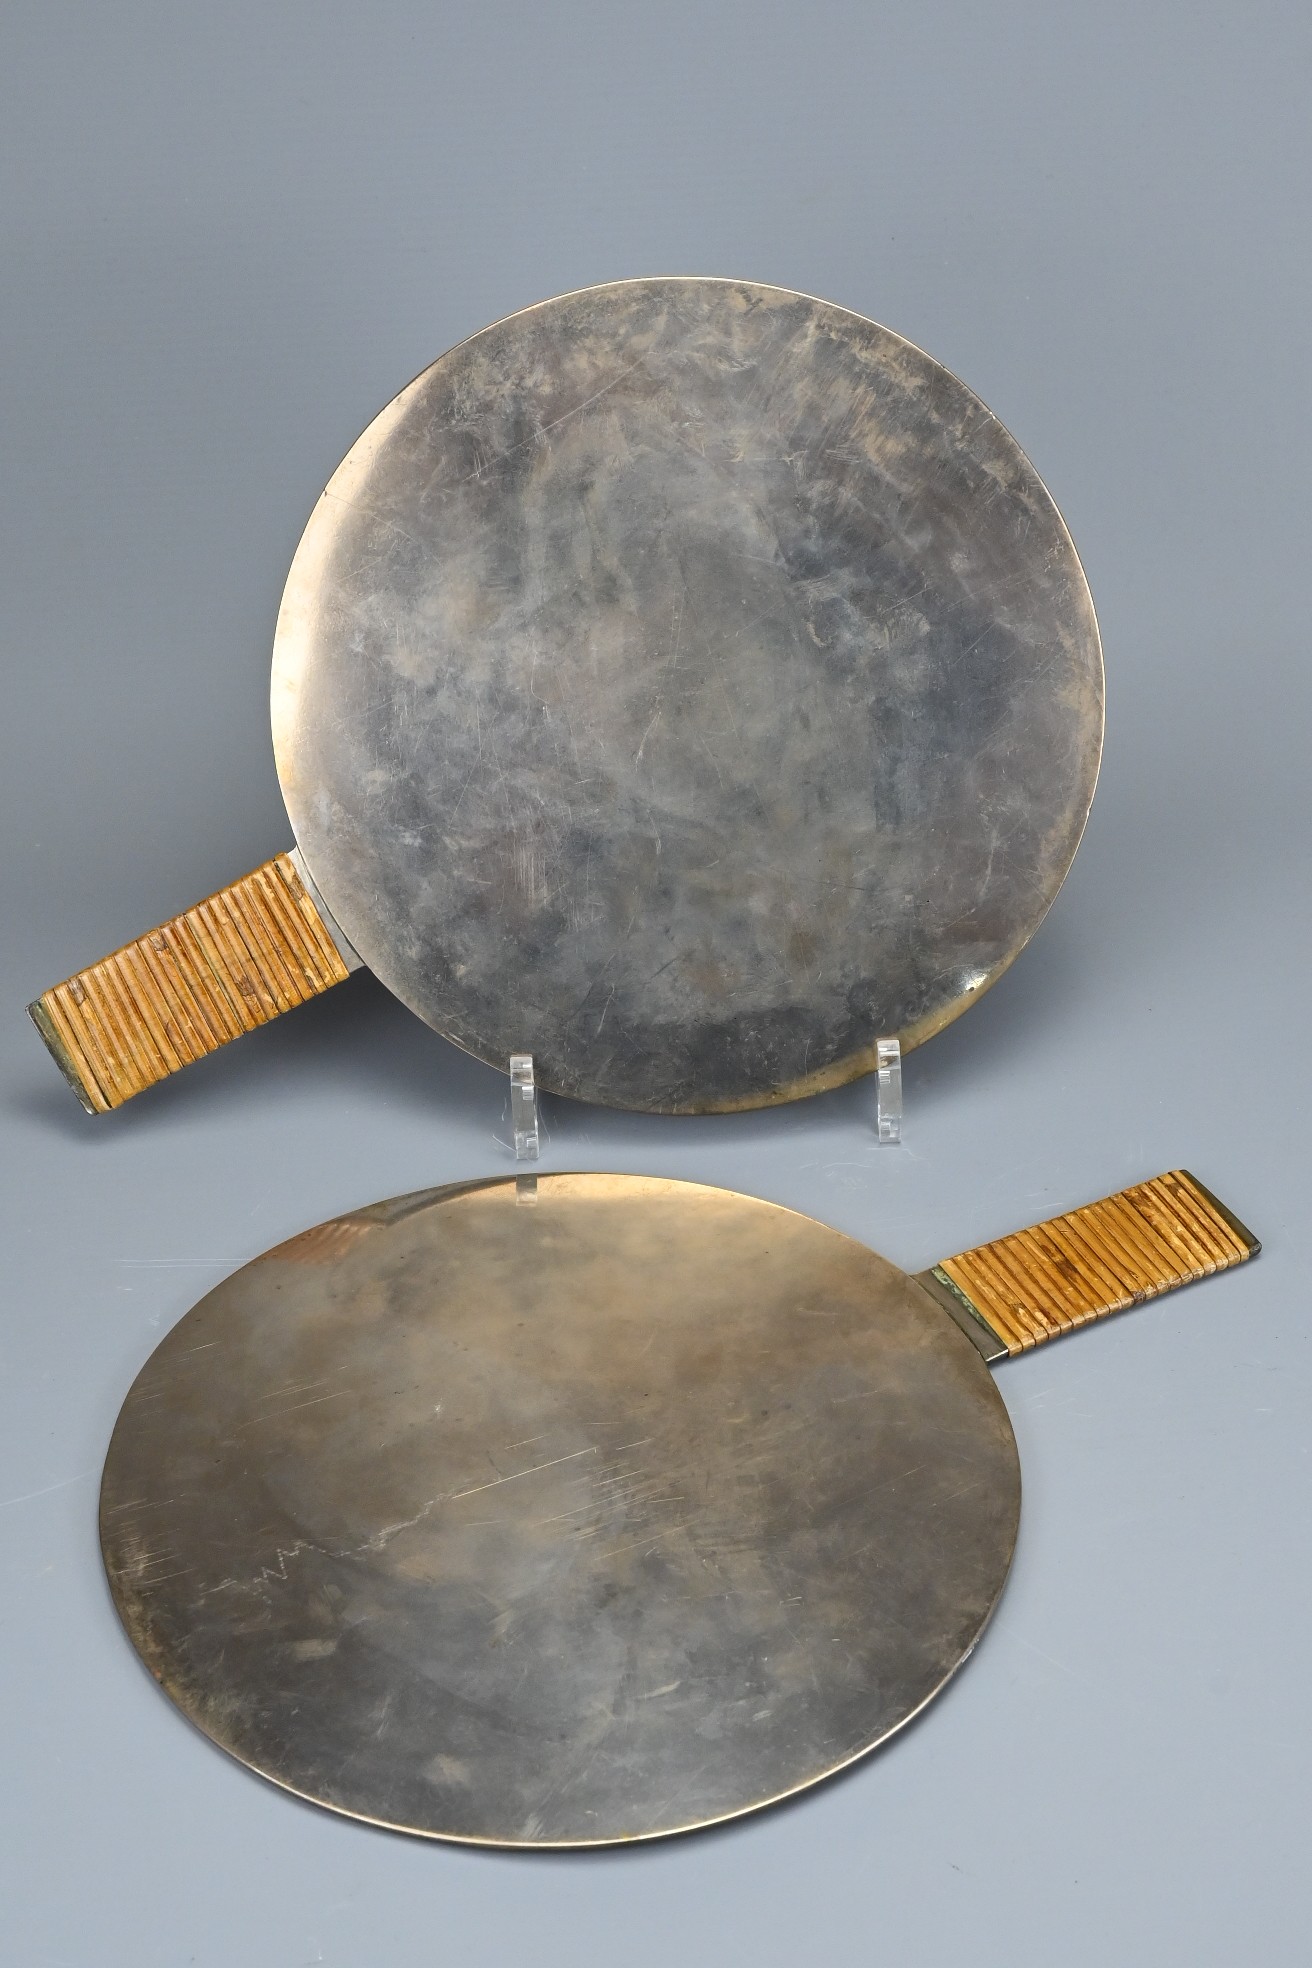 TWO JAPANESE POLISHED BRONZE HAND MIRRORS, KAGAMI, LATE 19TH CENTURY. Decorated with cranes under - Image 4 of 5